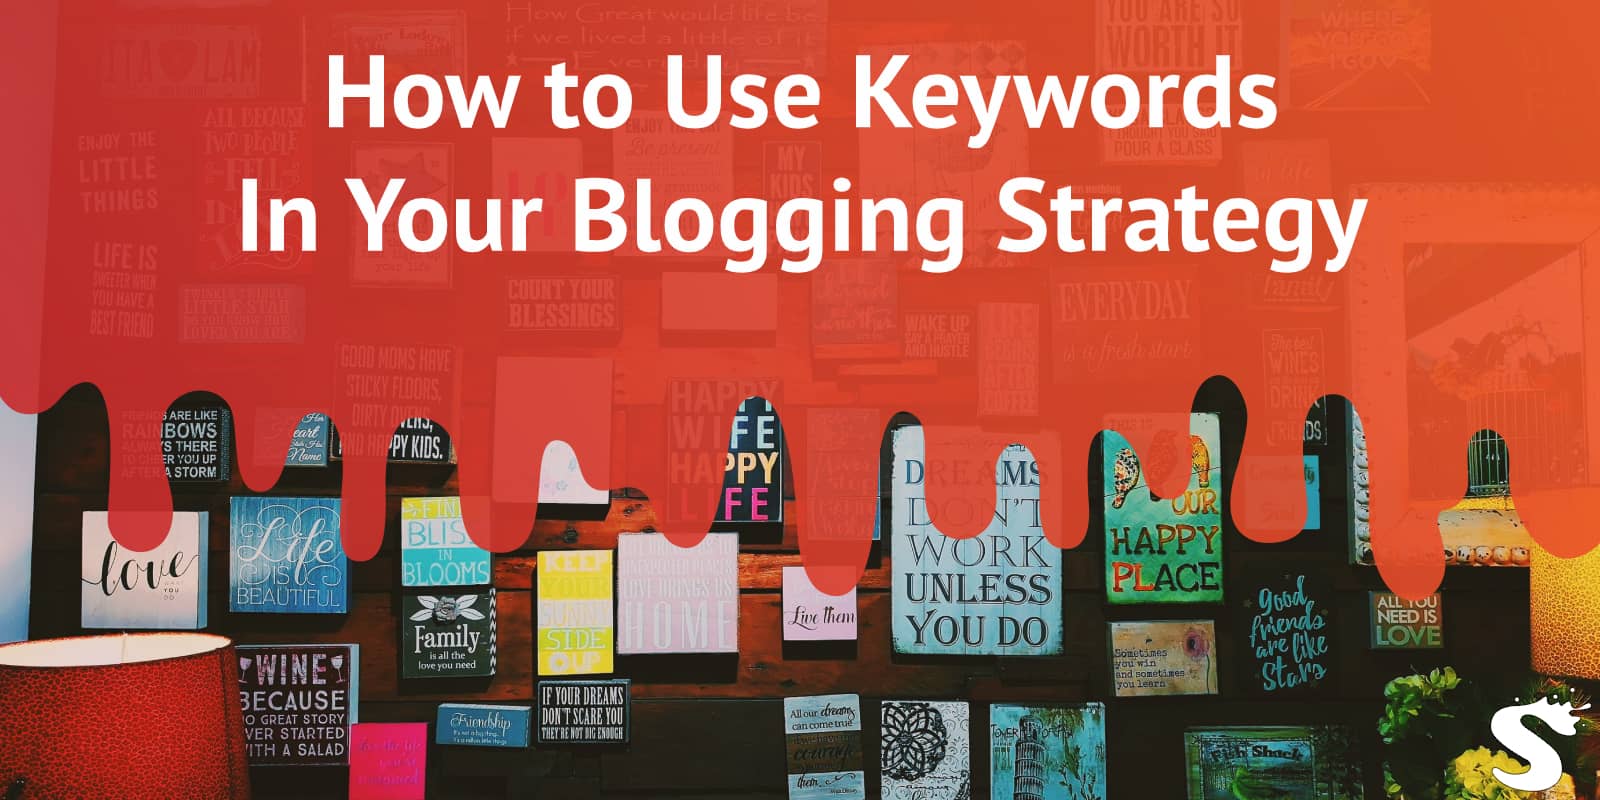 How to Use Keywords in Blogging Strategy